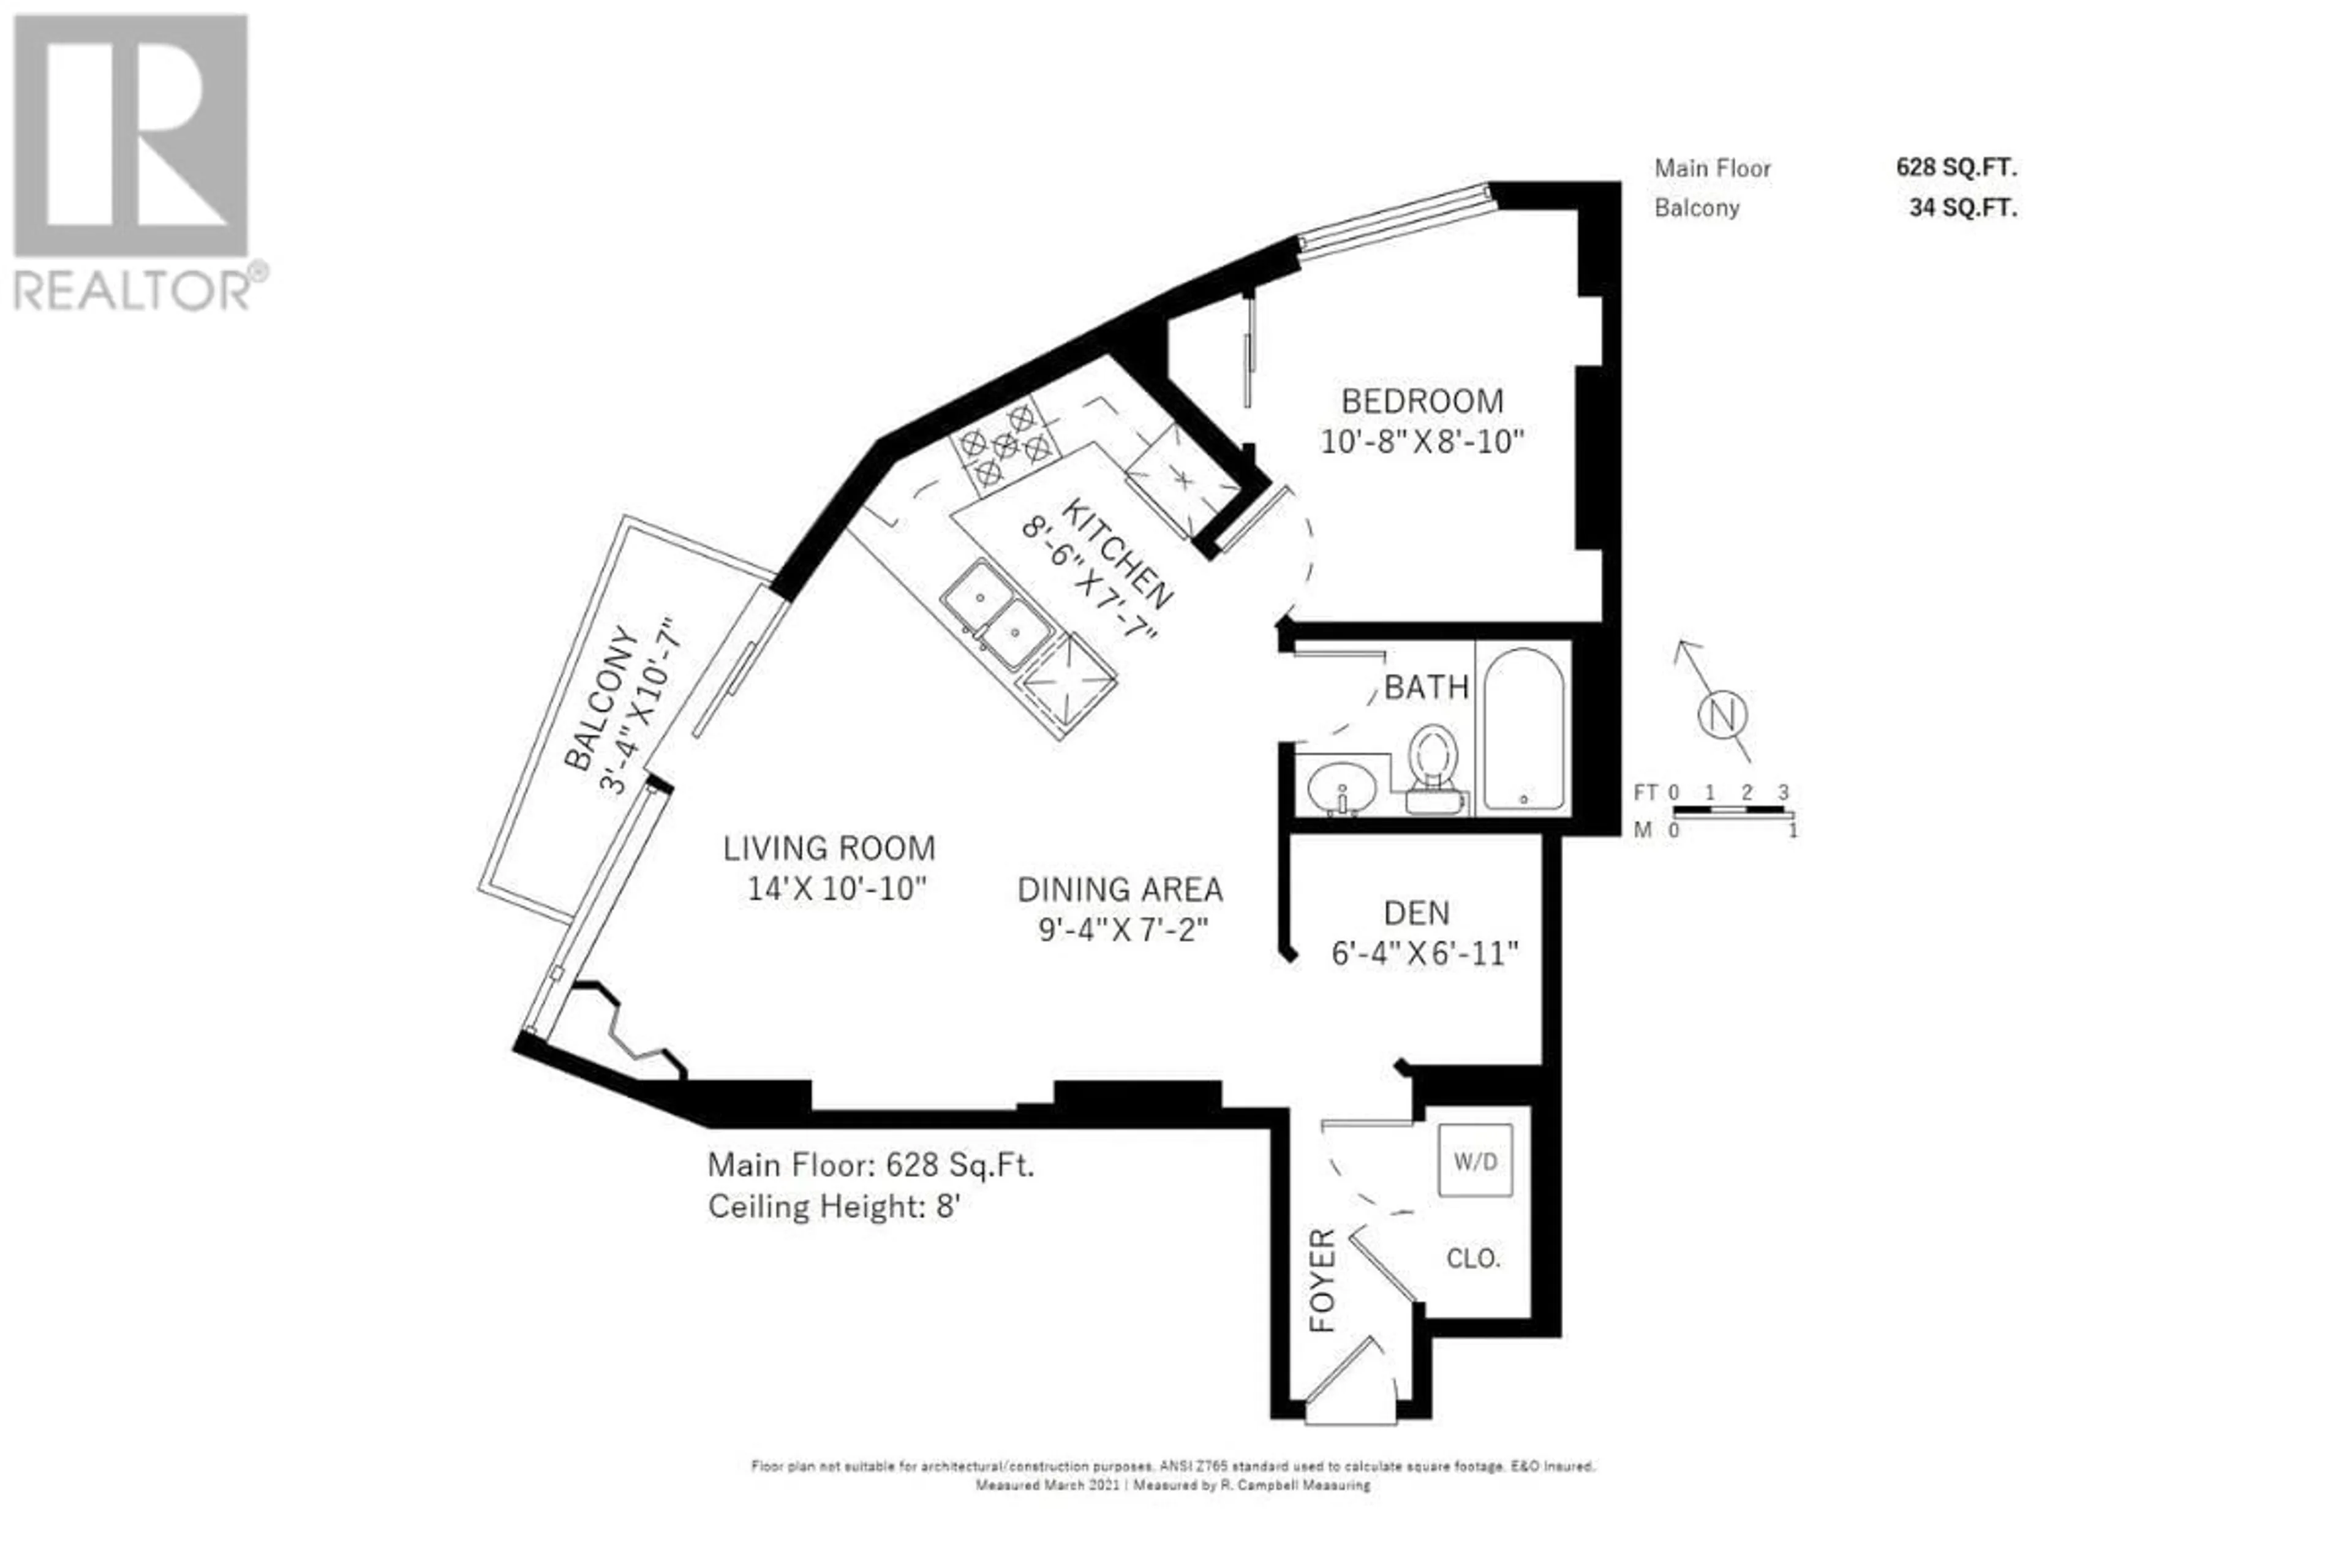 Floor plan for 607 501 PACIFIC STREET, Vancouver British Columbia V6Z2X6